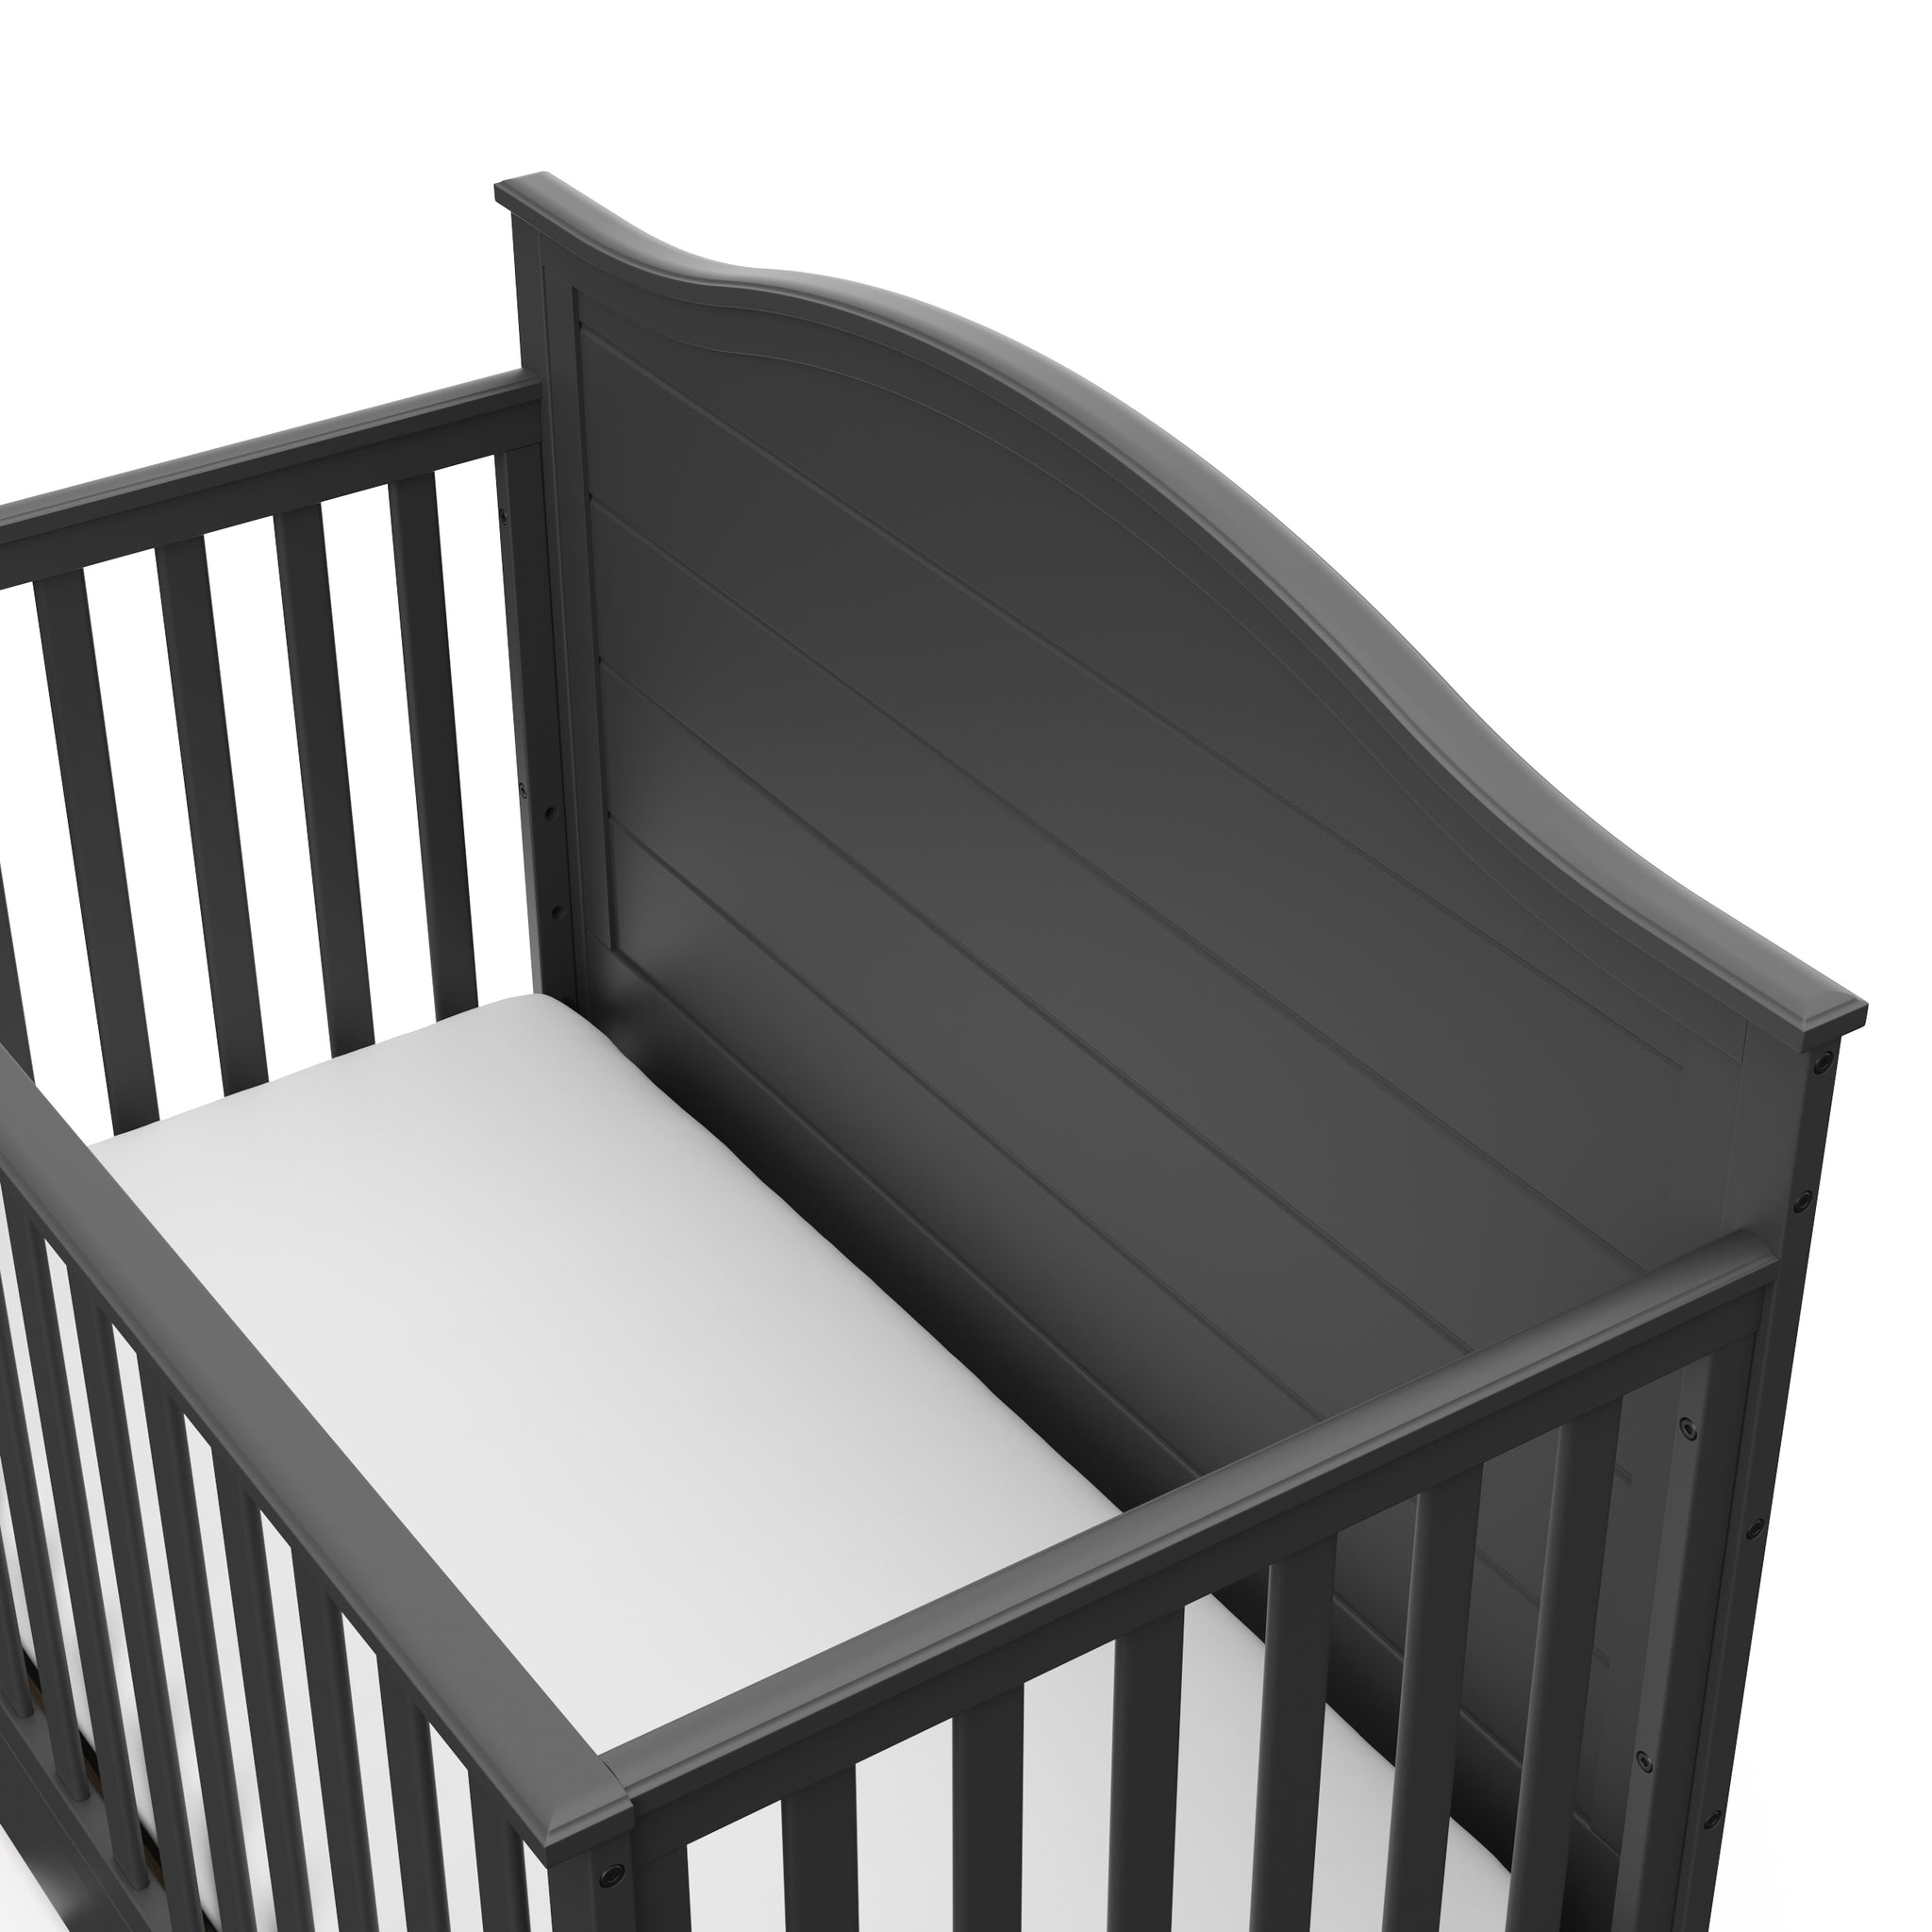 Close-up view of gray crib with drawer headboard